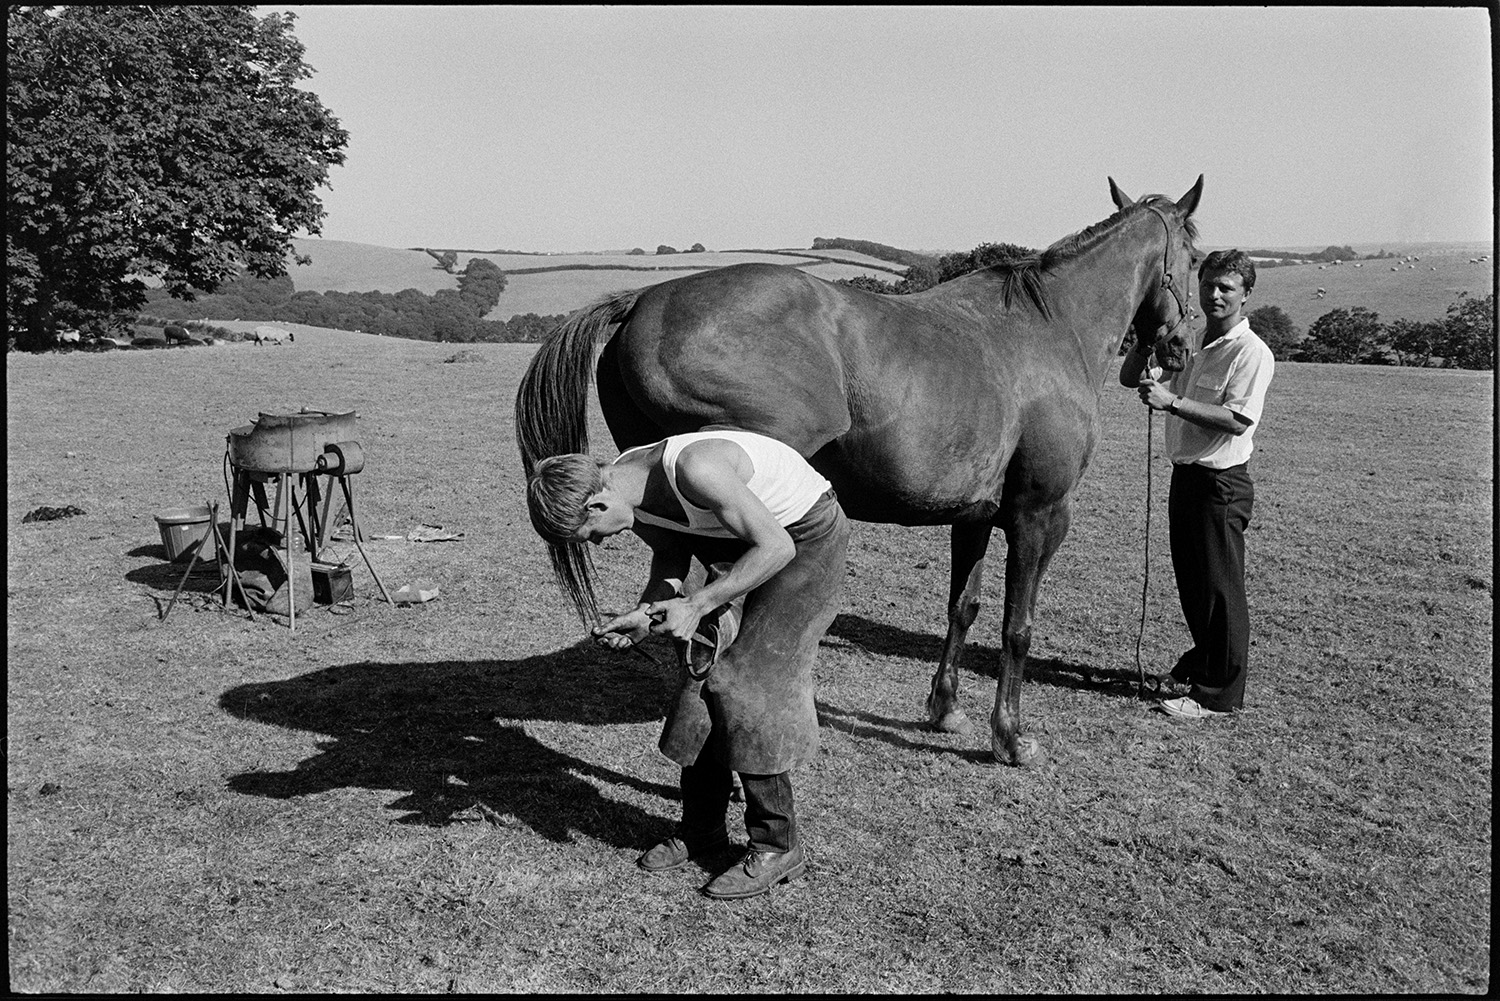 Blacksmith demonstrating at fete, wheel of fortune. 
[A blacksmith or farrier demonstrating how to shoe a horse in a field at a fete. His tools can be seen nearby. Another man is holding the reigns of the horse and a landscape of fields and trees is visible in the background.]